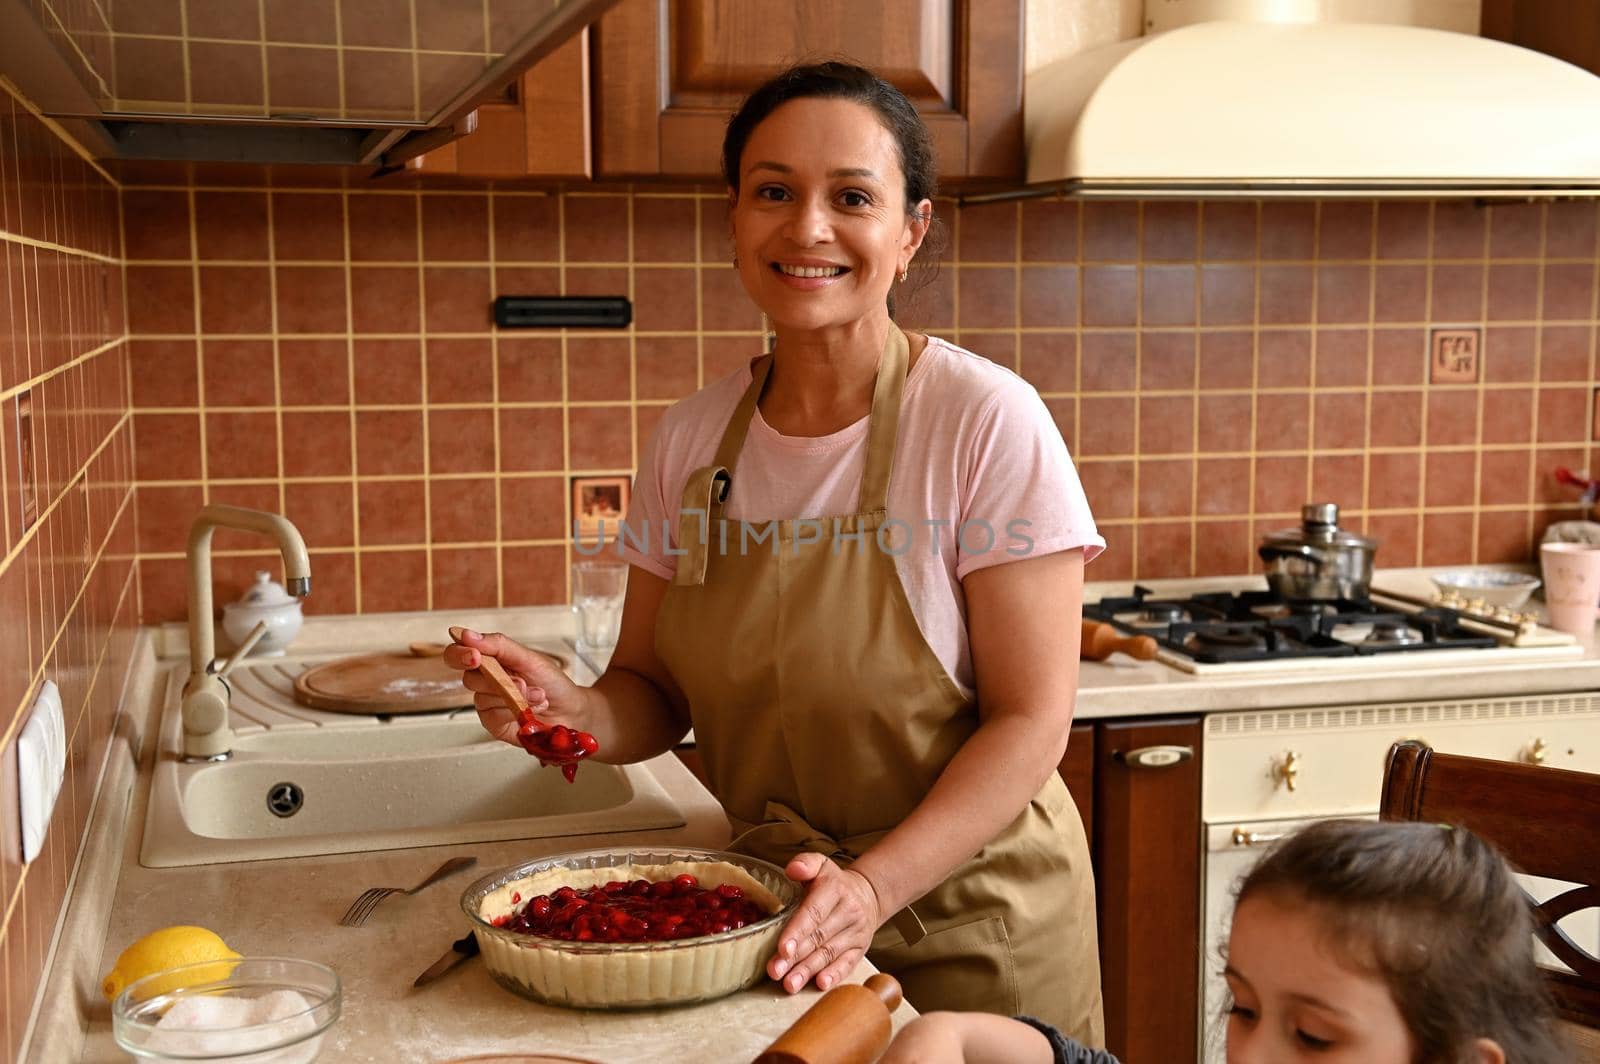 Beautiful middle-aged Latin American woman, loving mom in chef apron, putting fresh cherries on a rolled out dough, smiling a cheerful toothy smile while preparing homemade pie with her cute daughter